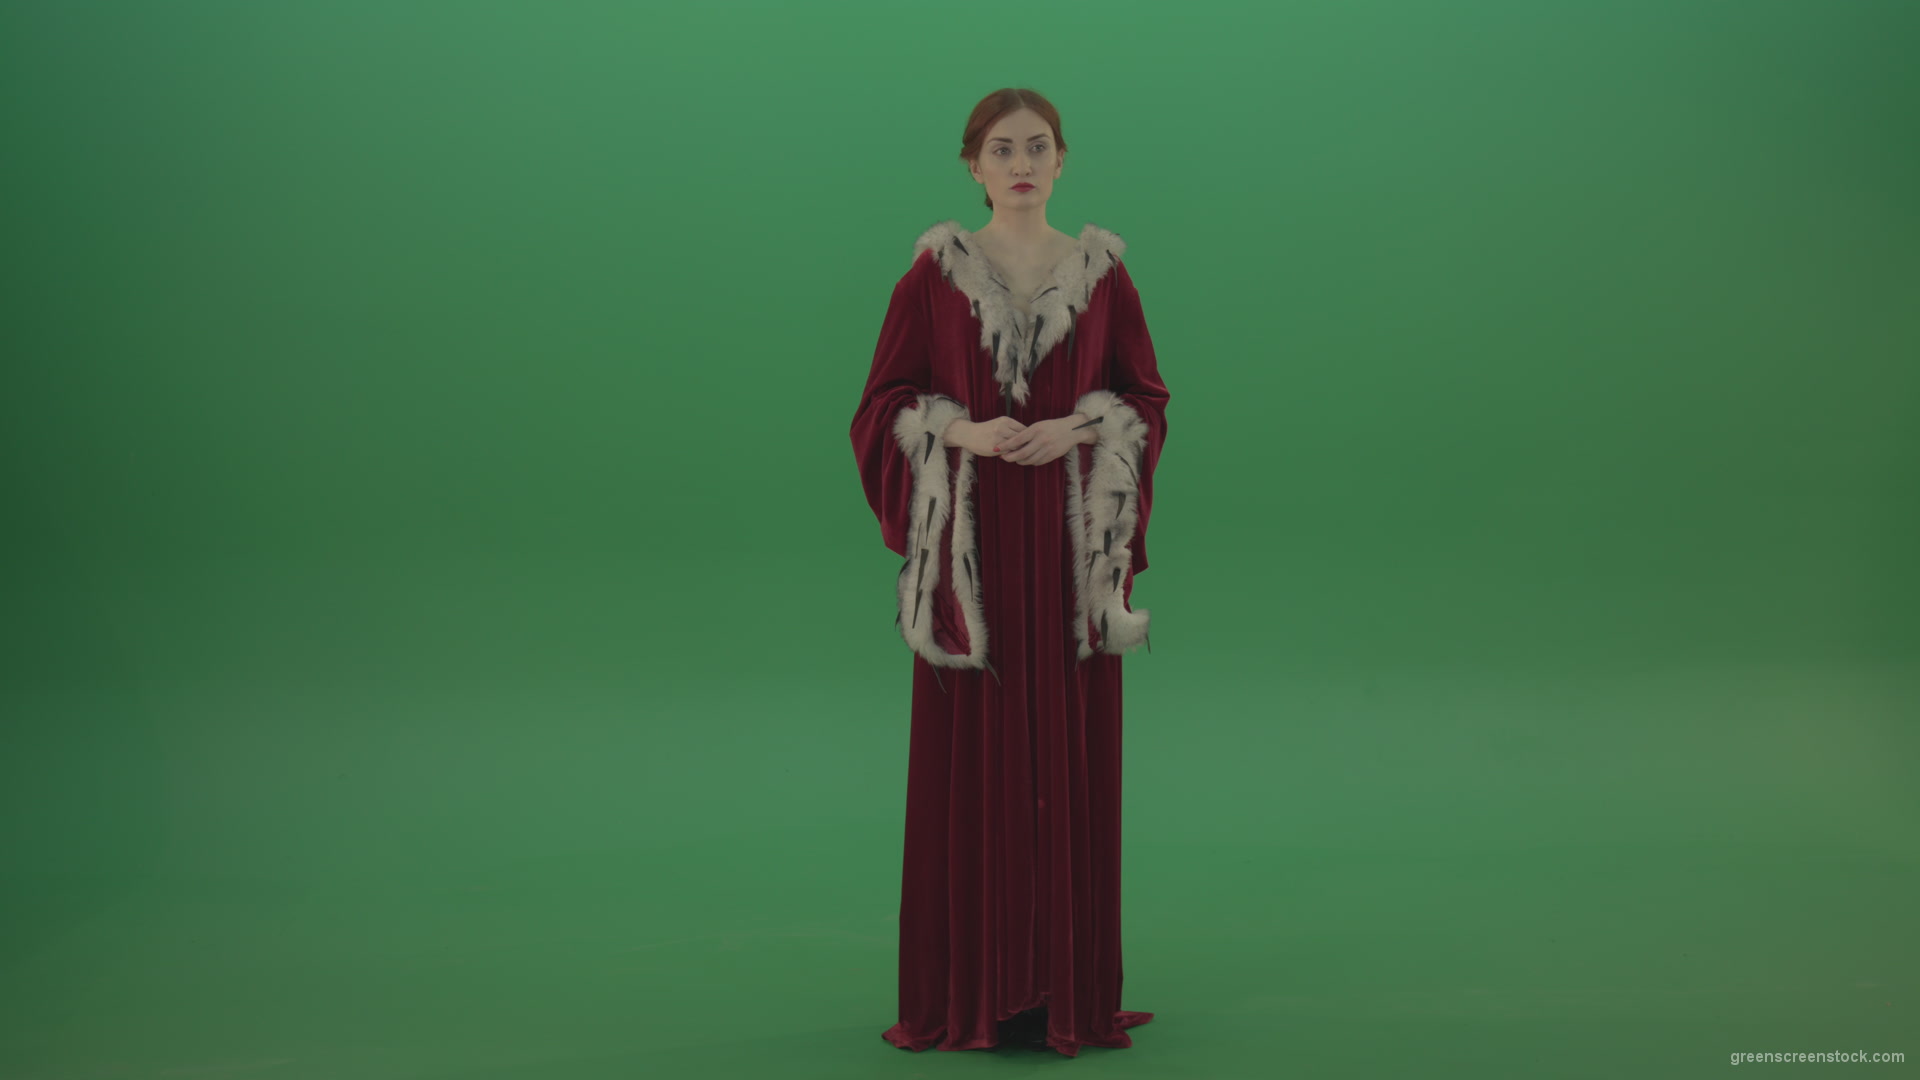 Young-actress-dressed-in-royal-dress-showing-different-scenes_004 Green Screen Stock